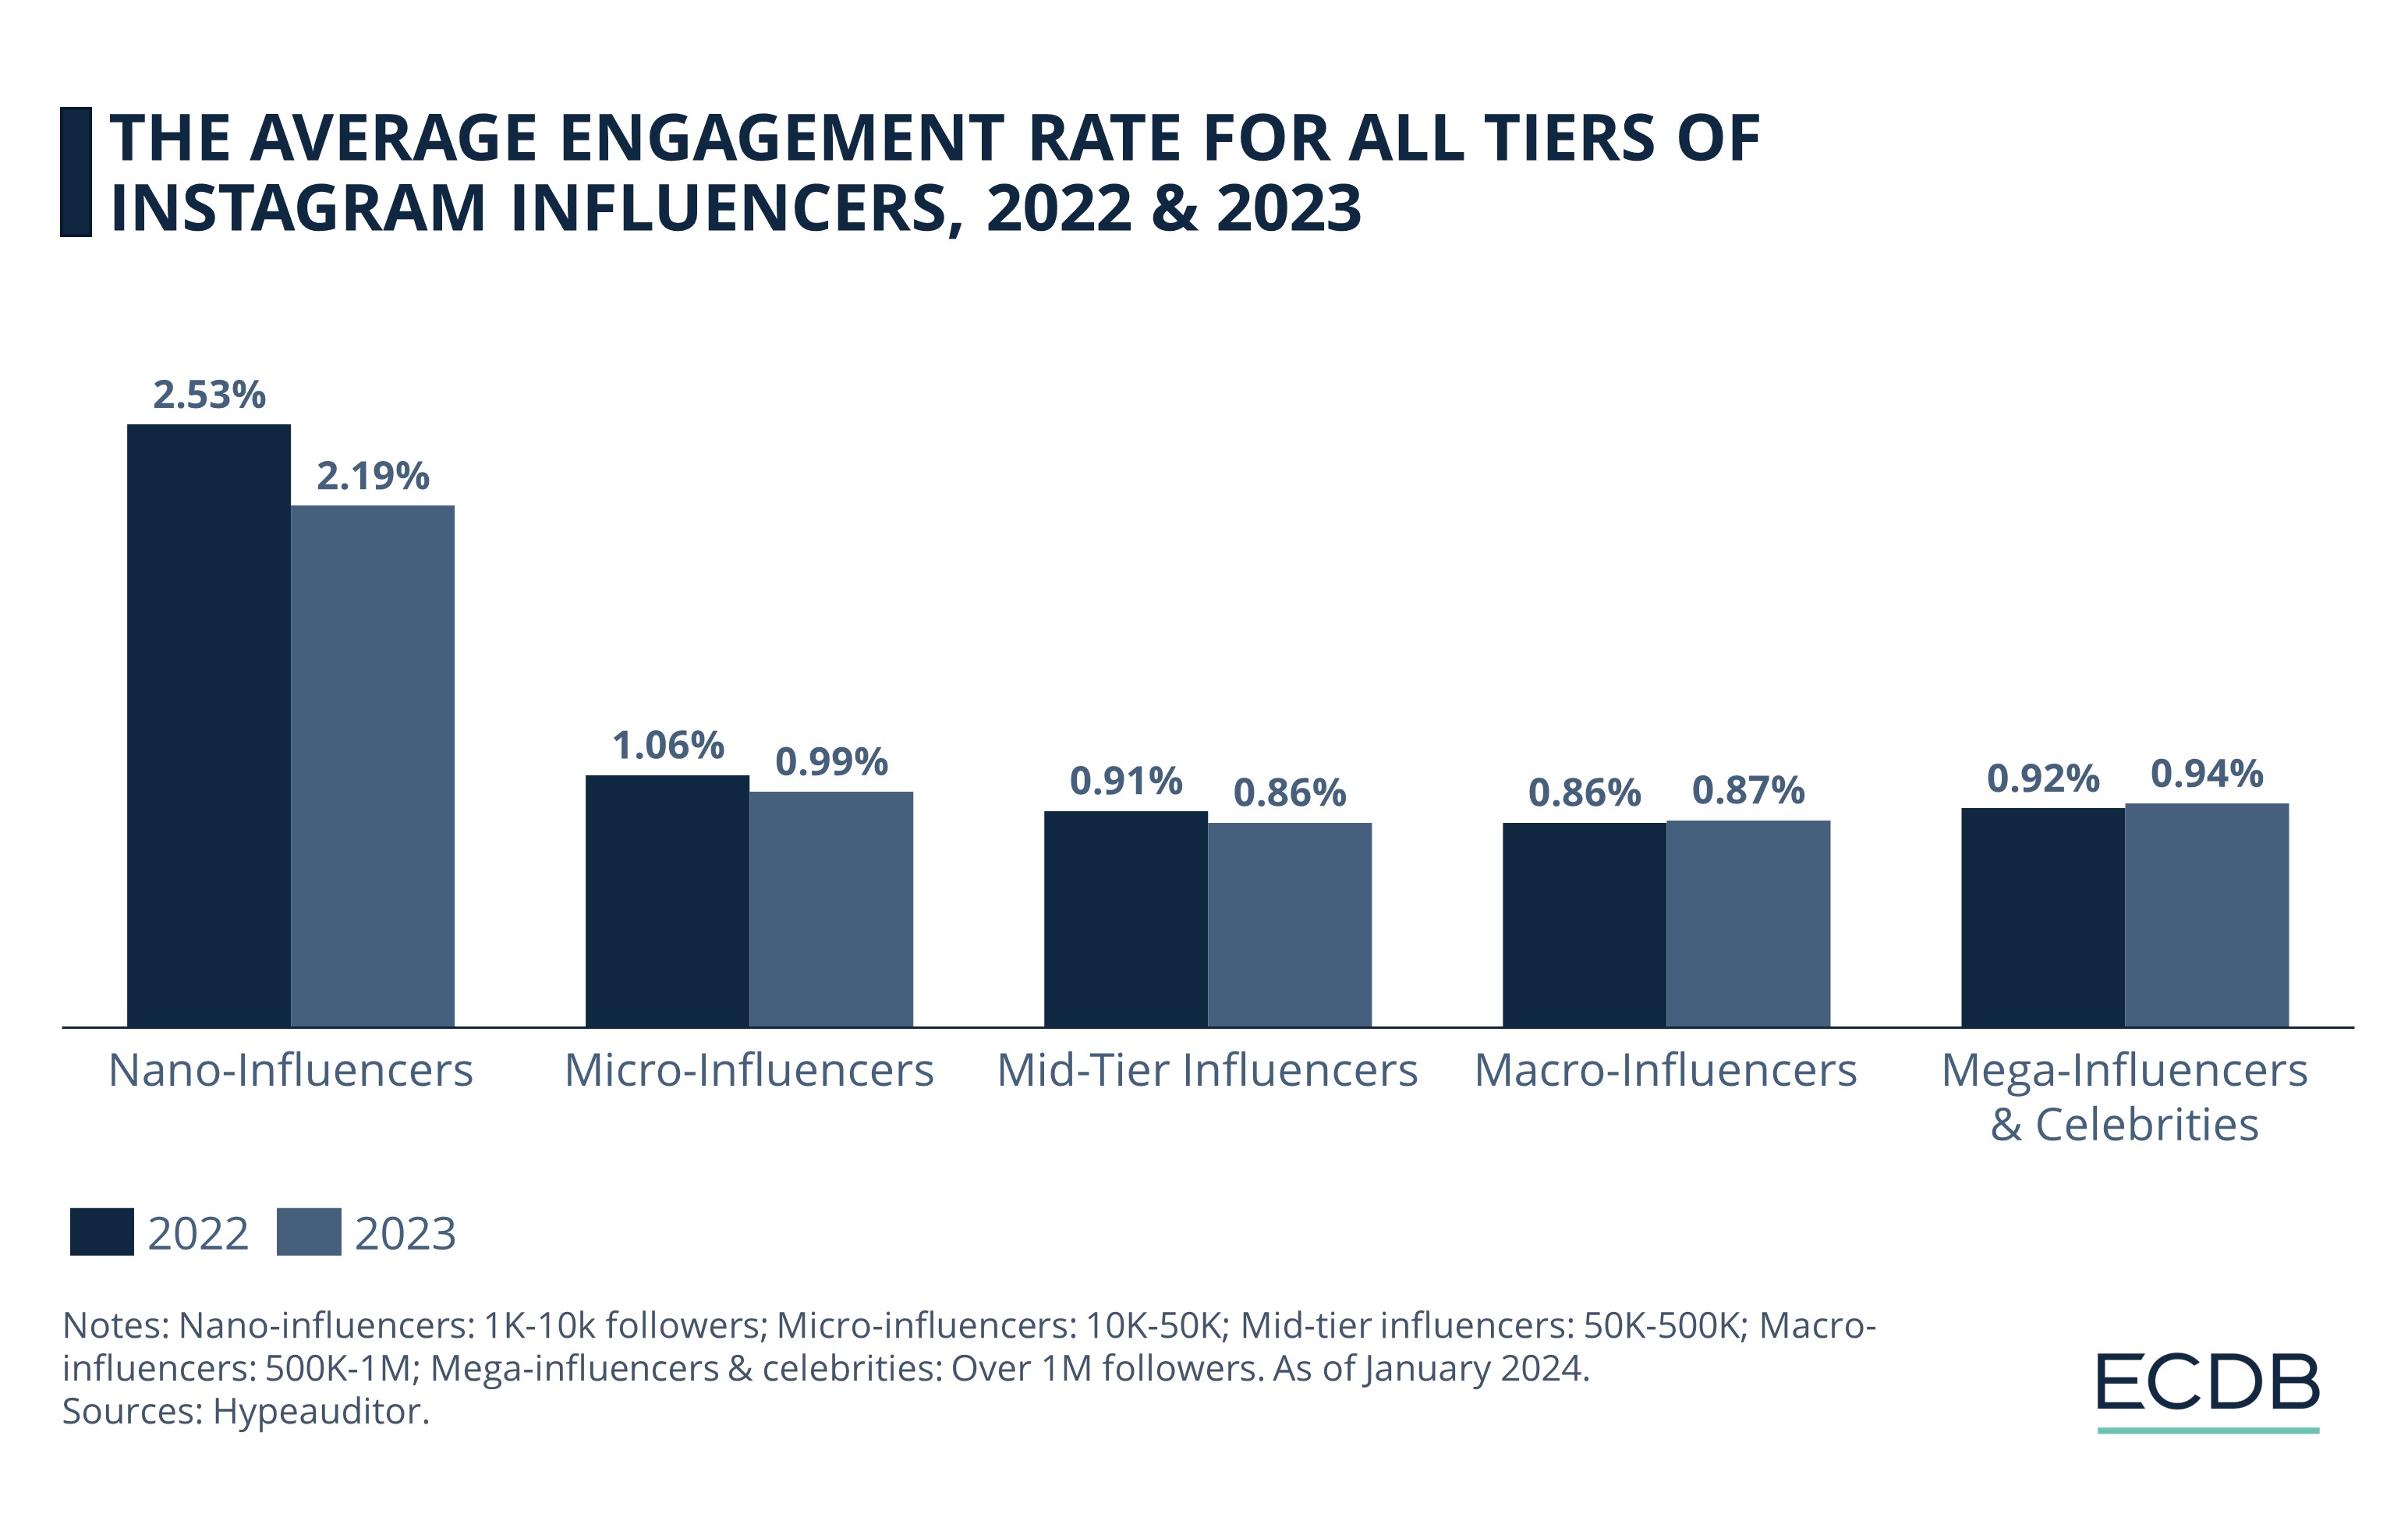 The Average Engagement Rate for All Tiers of Instagram Influencers, 2022 & 2023